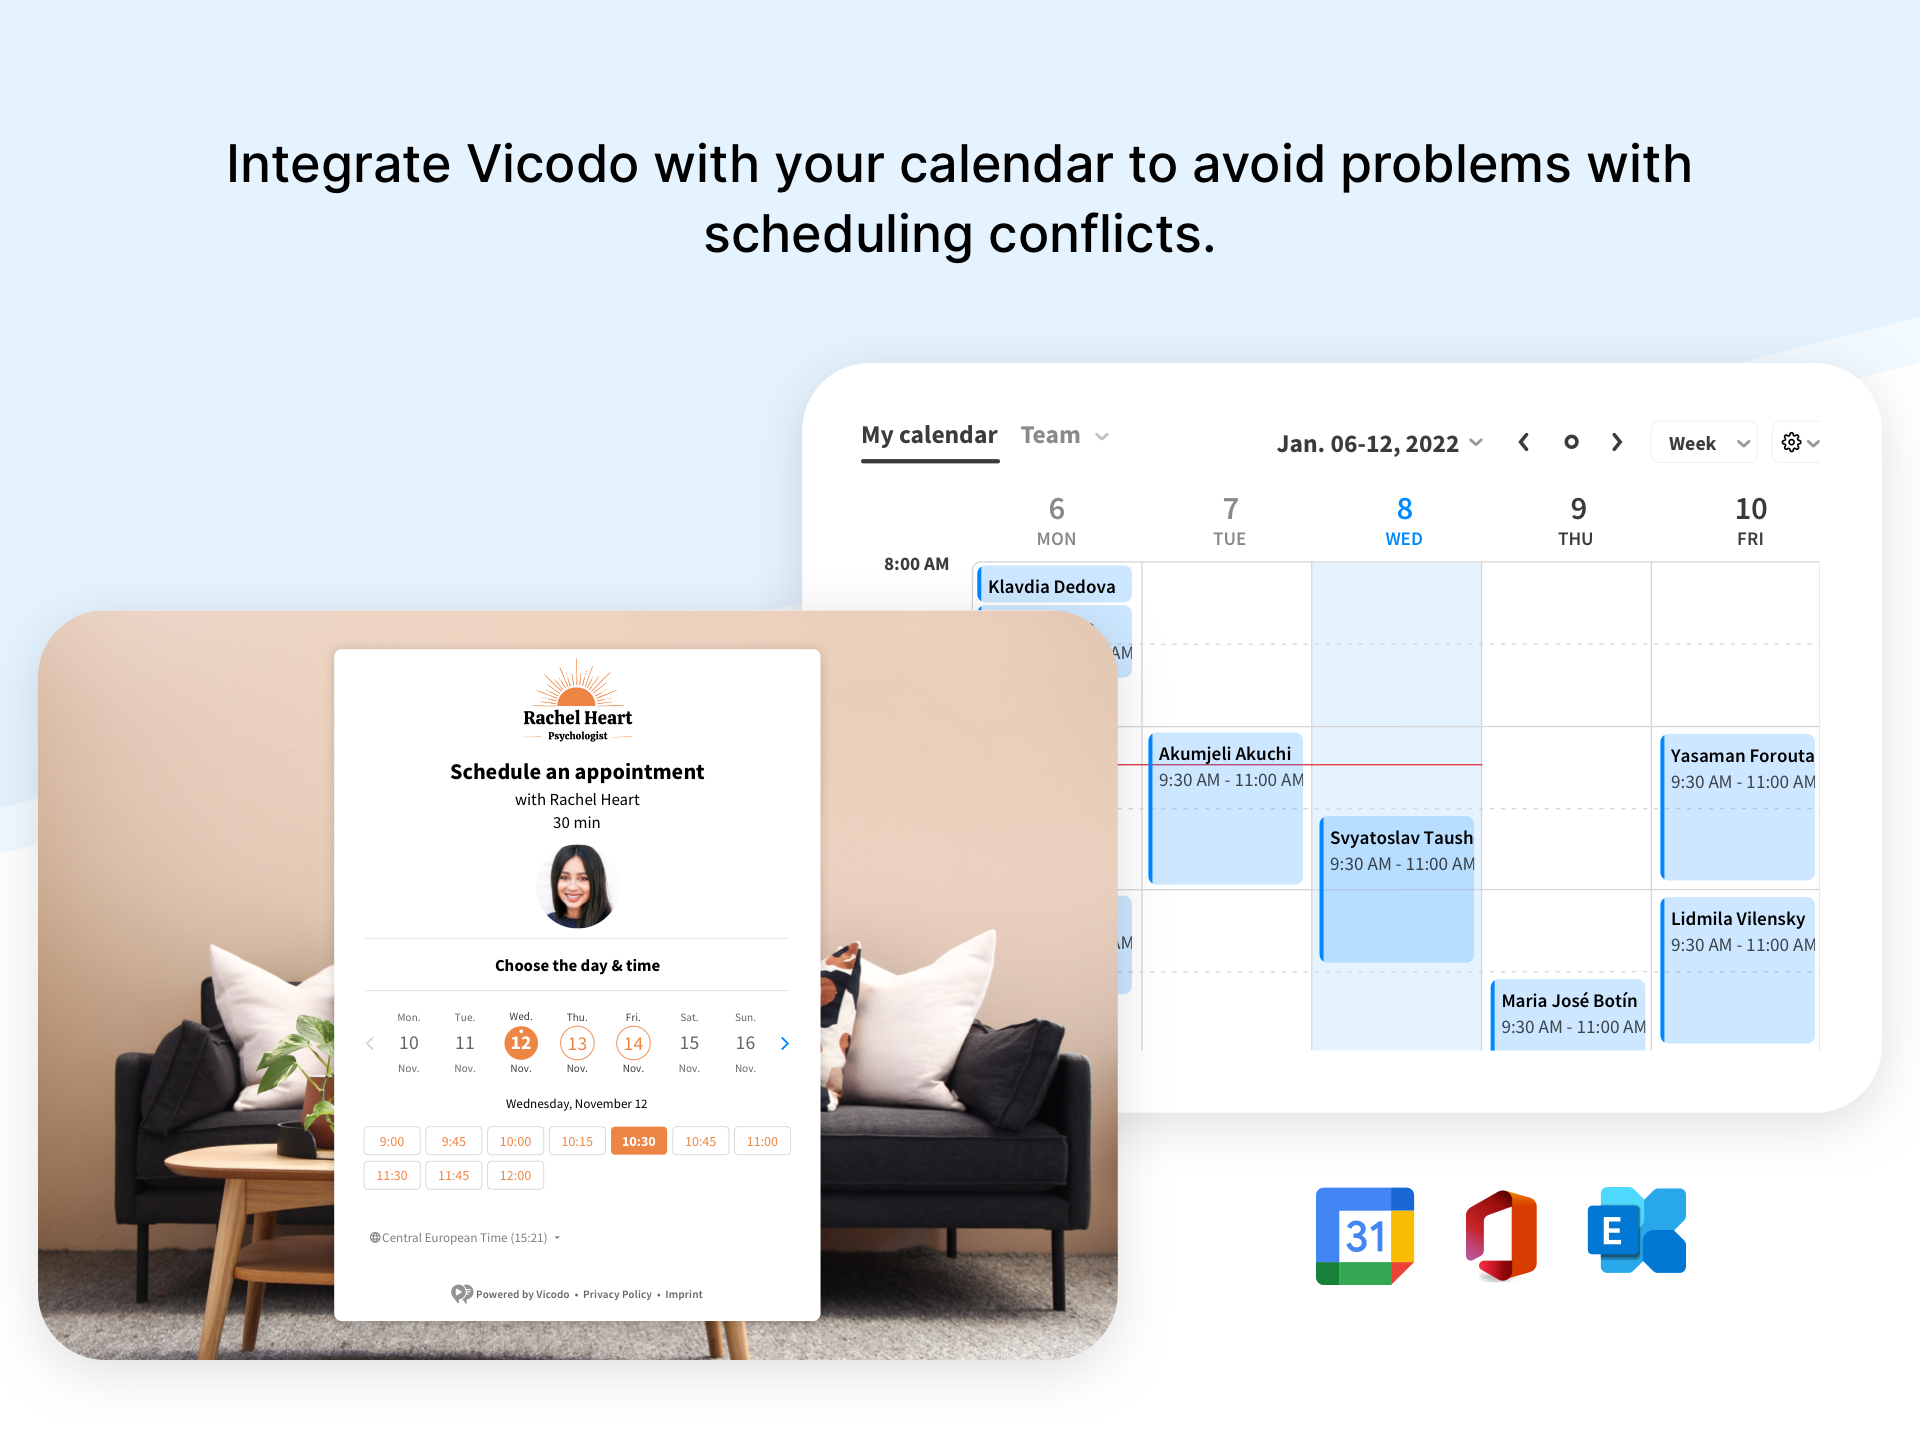 Users can integrate Vicodo with their personal calendars, so the booking page reflects the real availability of operators.